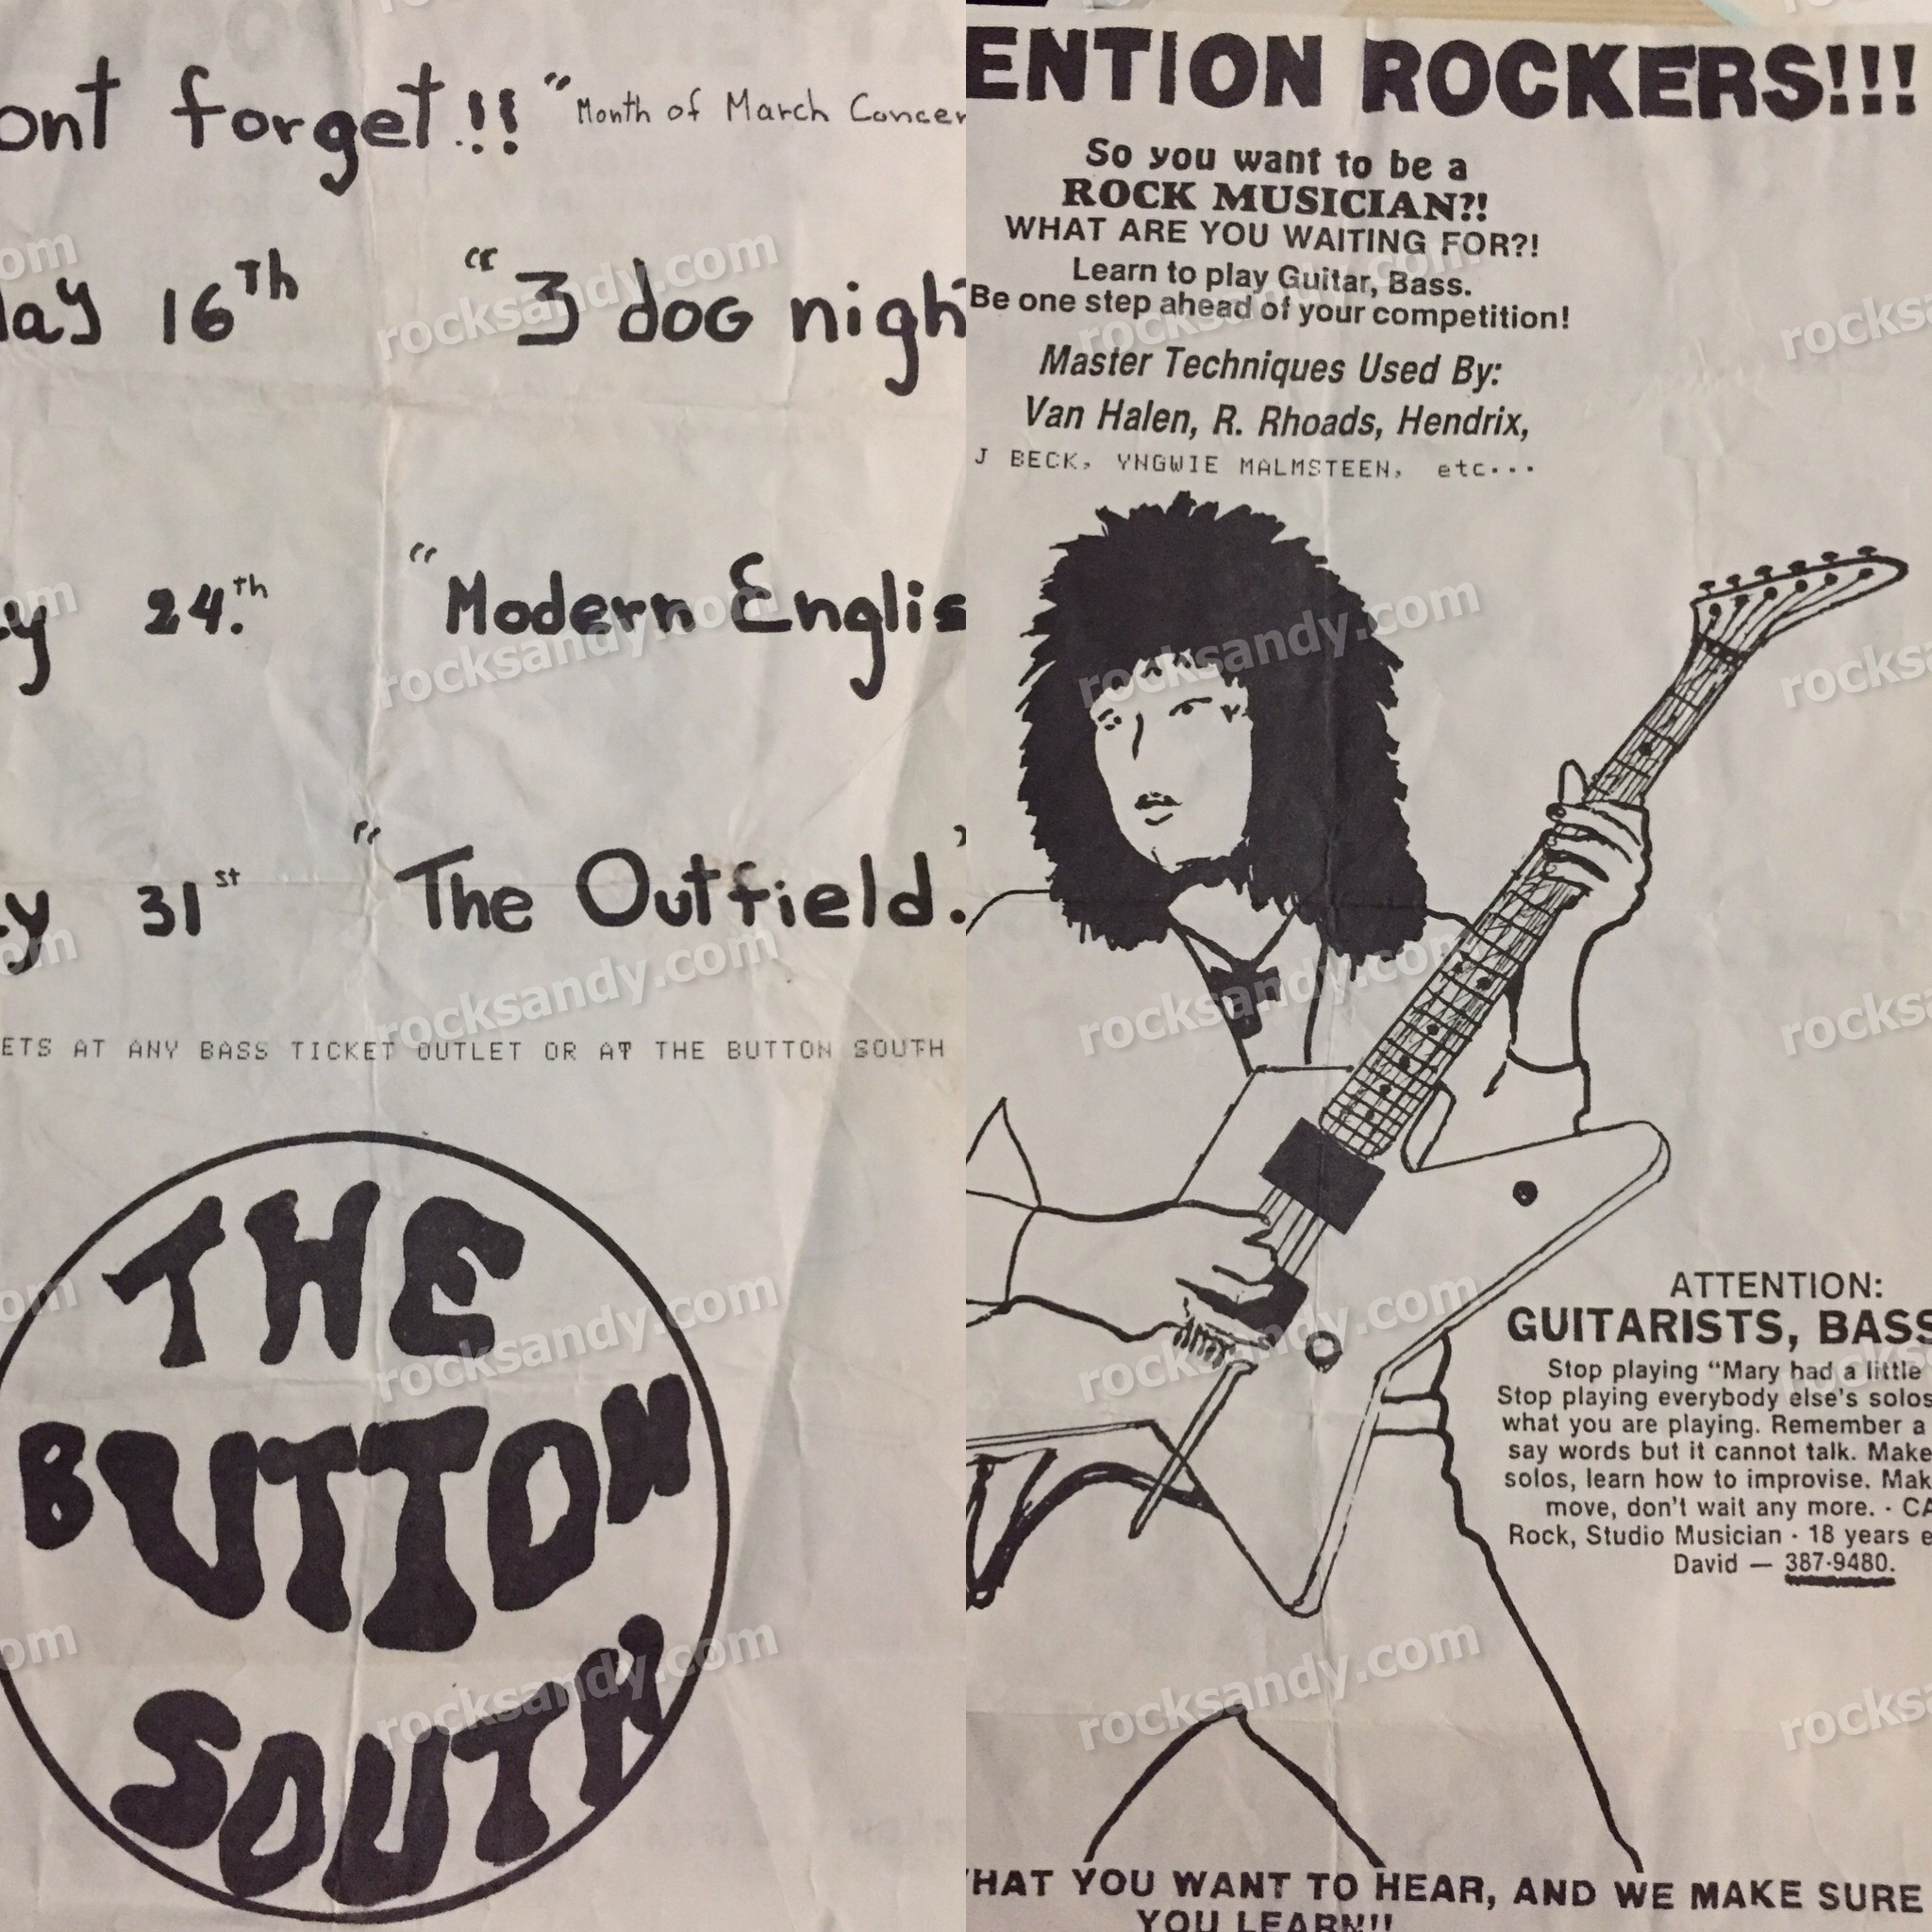 ButtonSouth1980s